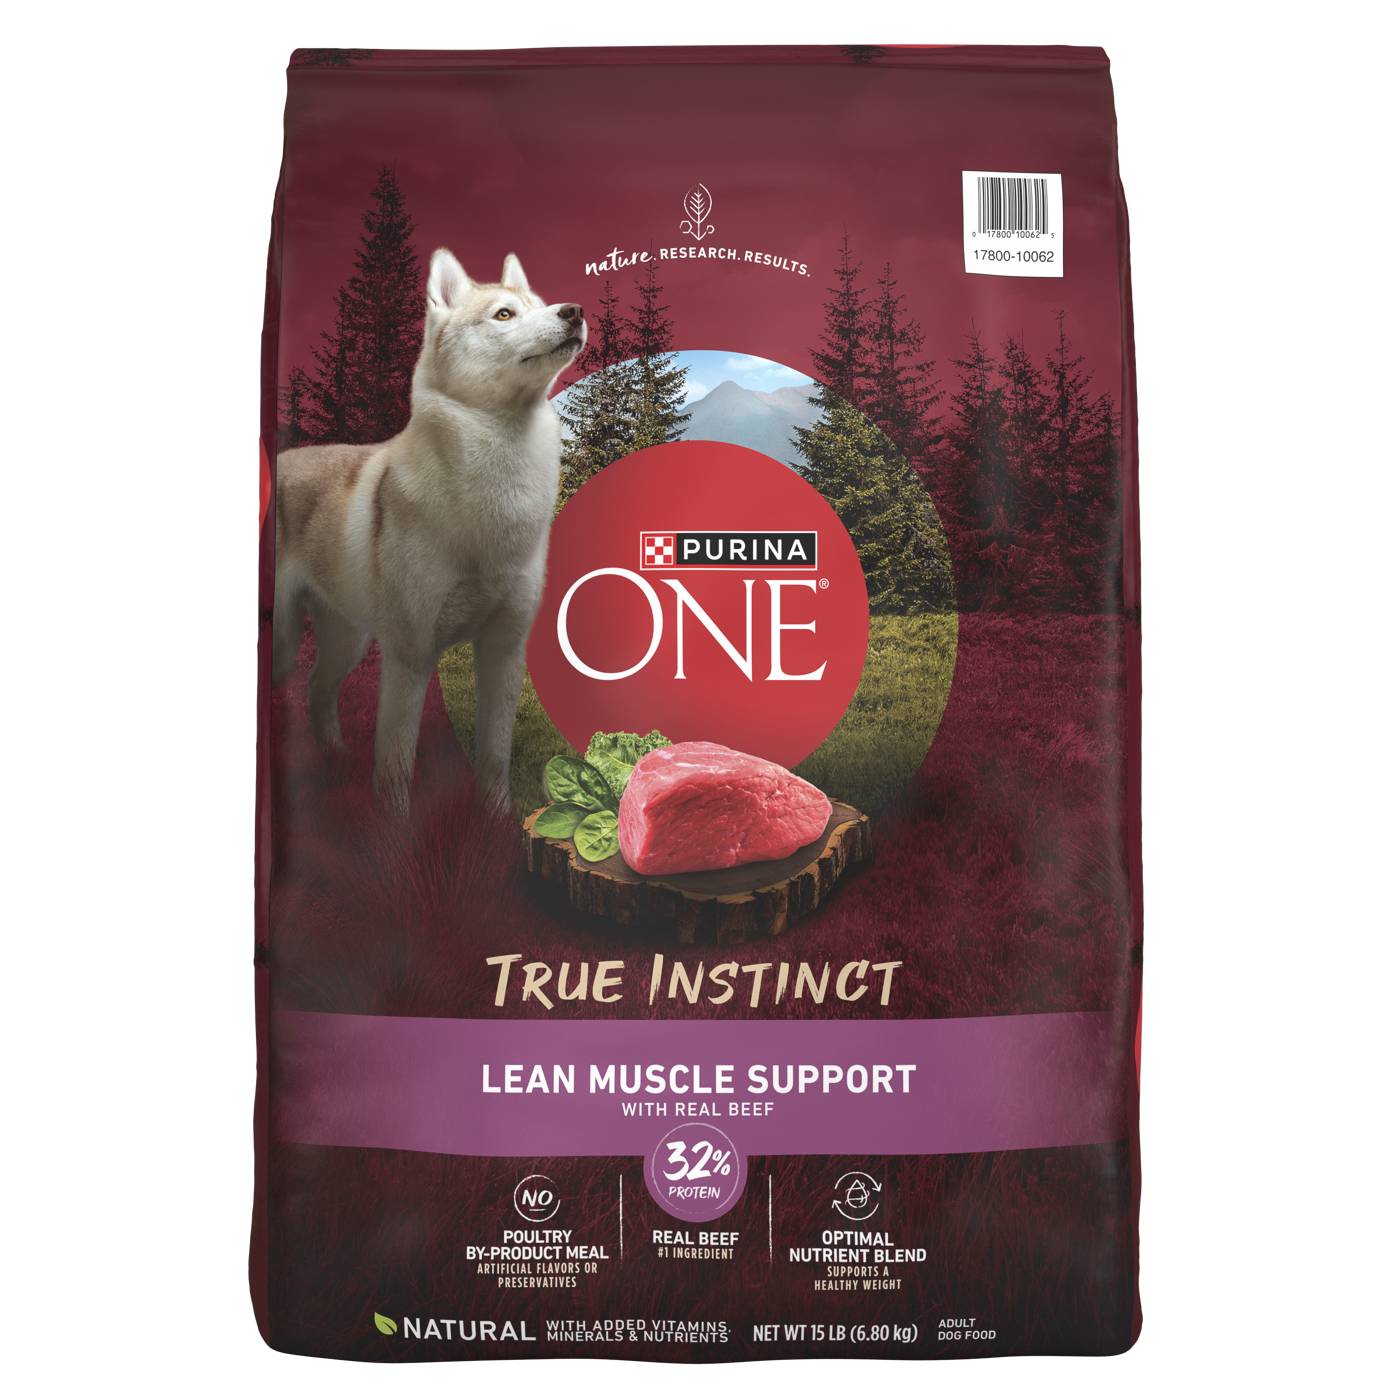 Purina One True Instinct Lean Muscle Support Beef Dry Dog Food; image 1 of 5